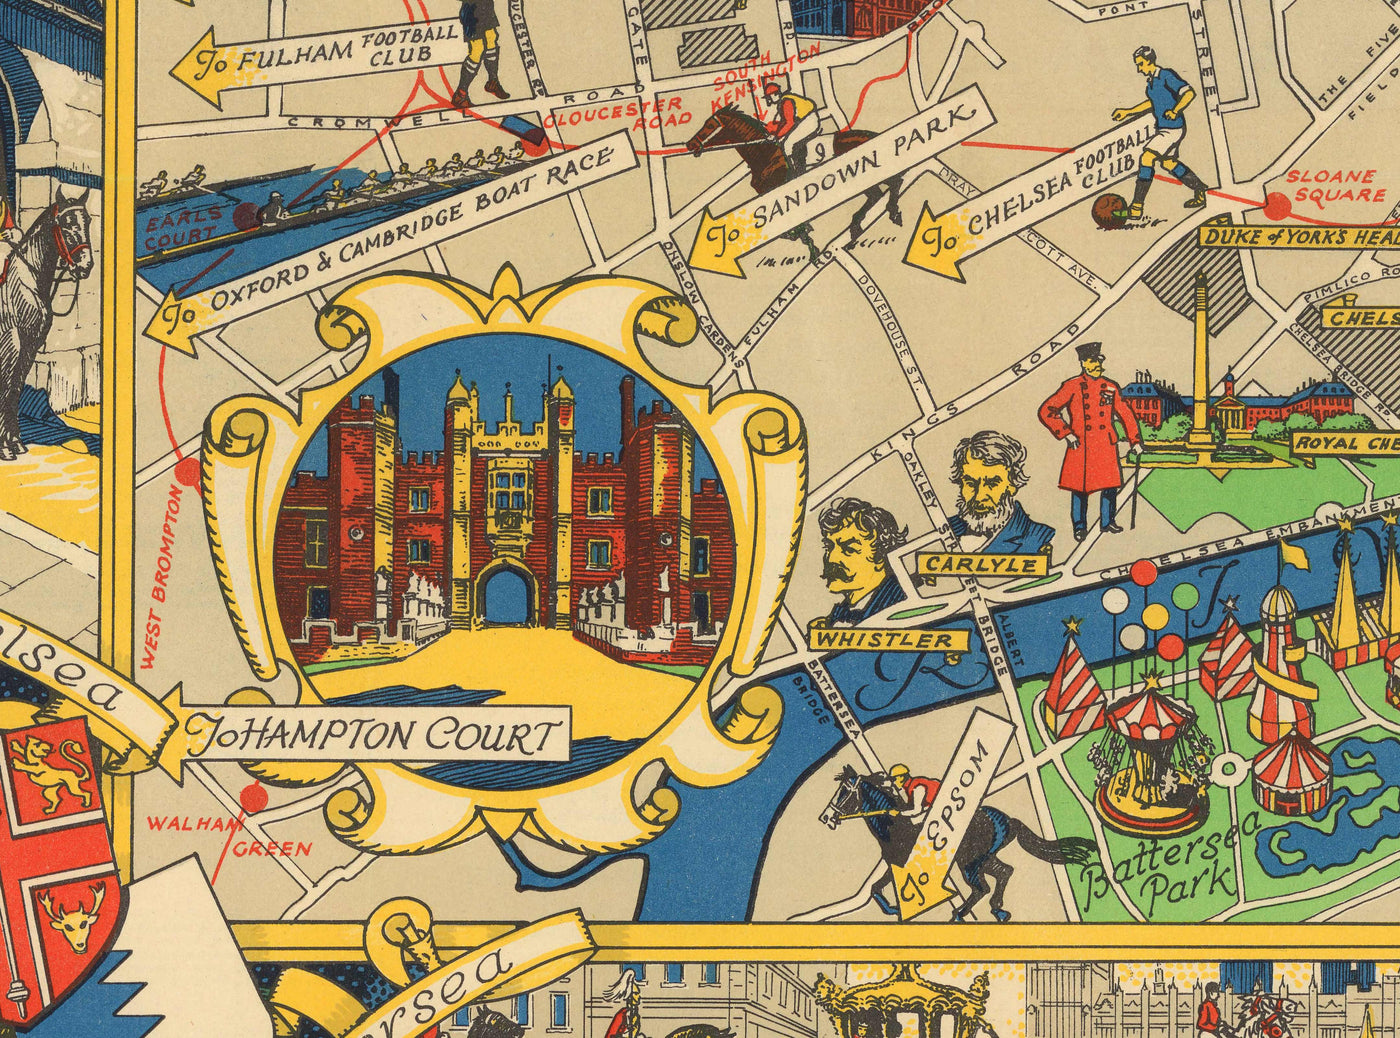 Old Map of Central London, 1951 - Festival of Britain, Royal Festival Hall, Landmarks, South Bank